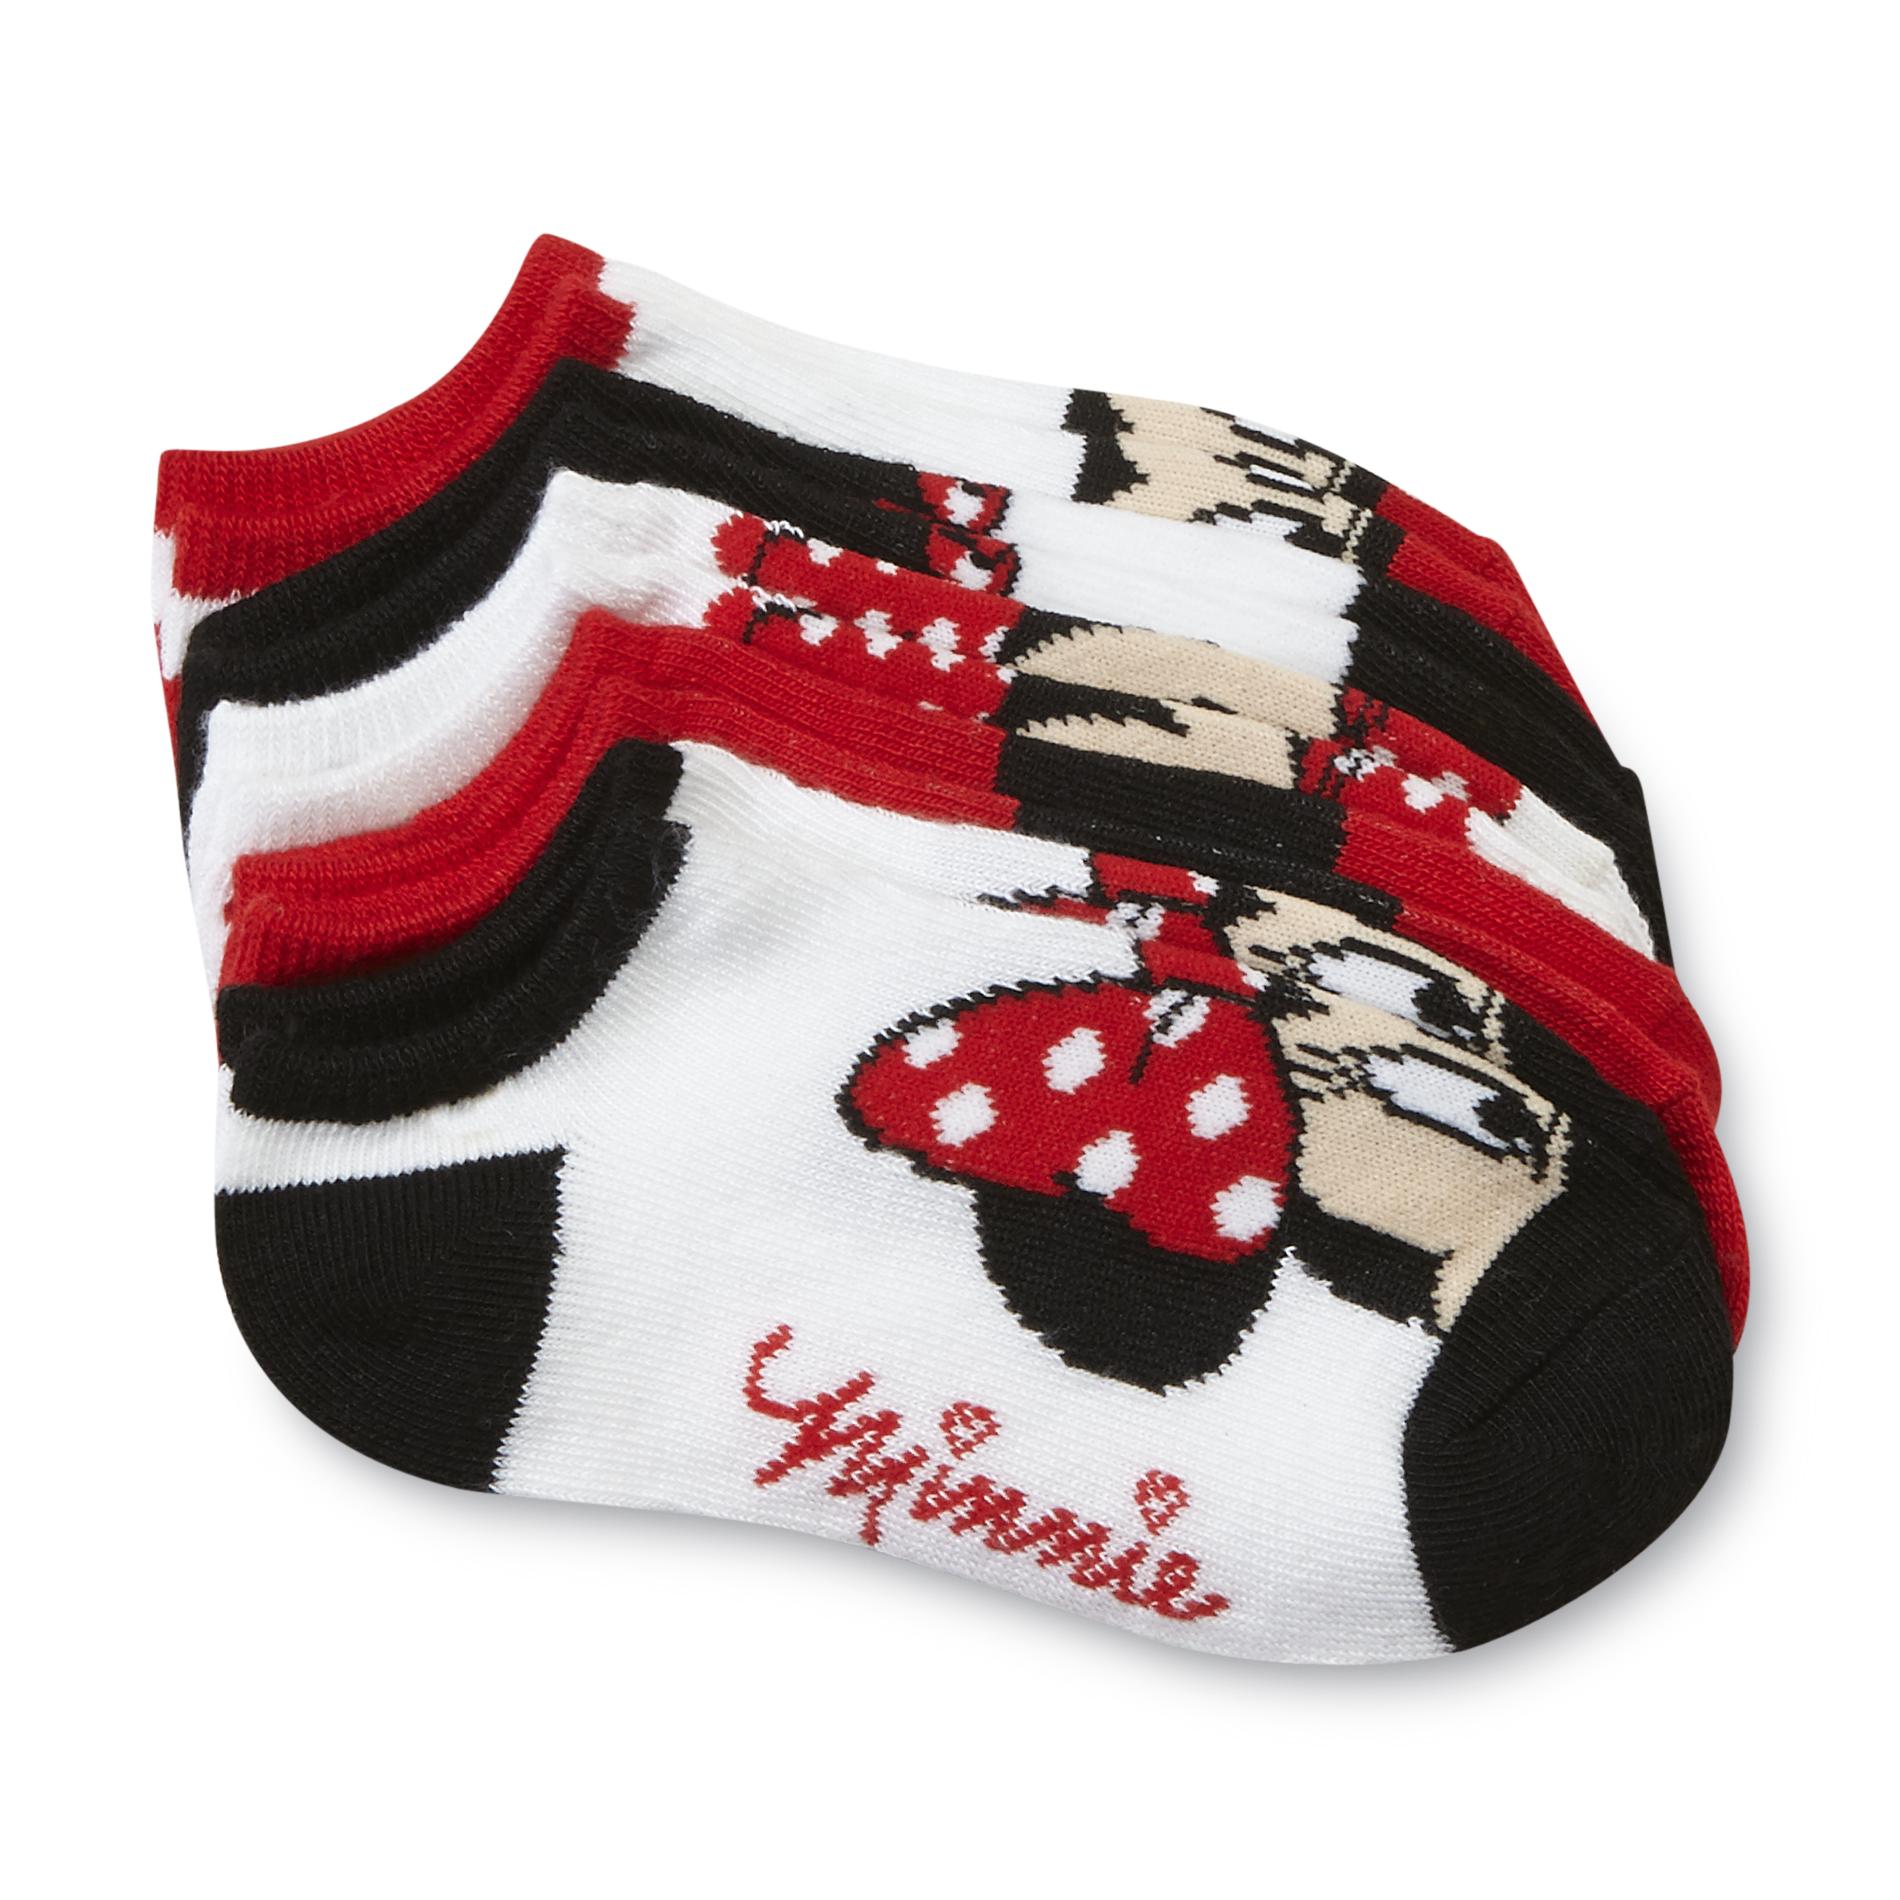 Disney Girl's 5-Pairs No-Show Socks - Minnie Mouse